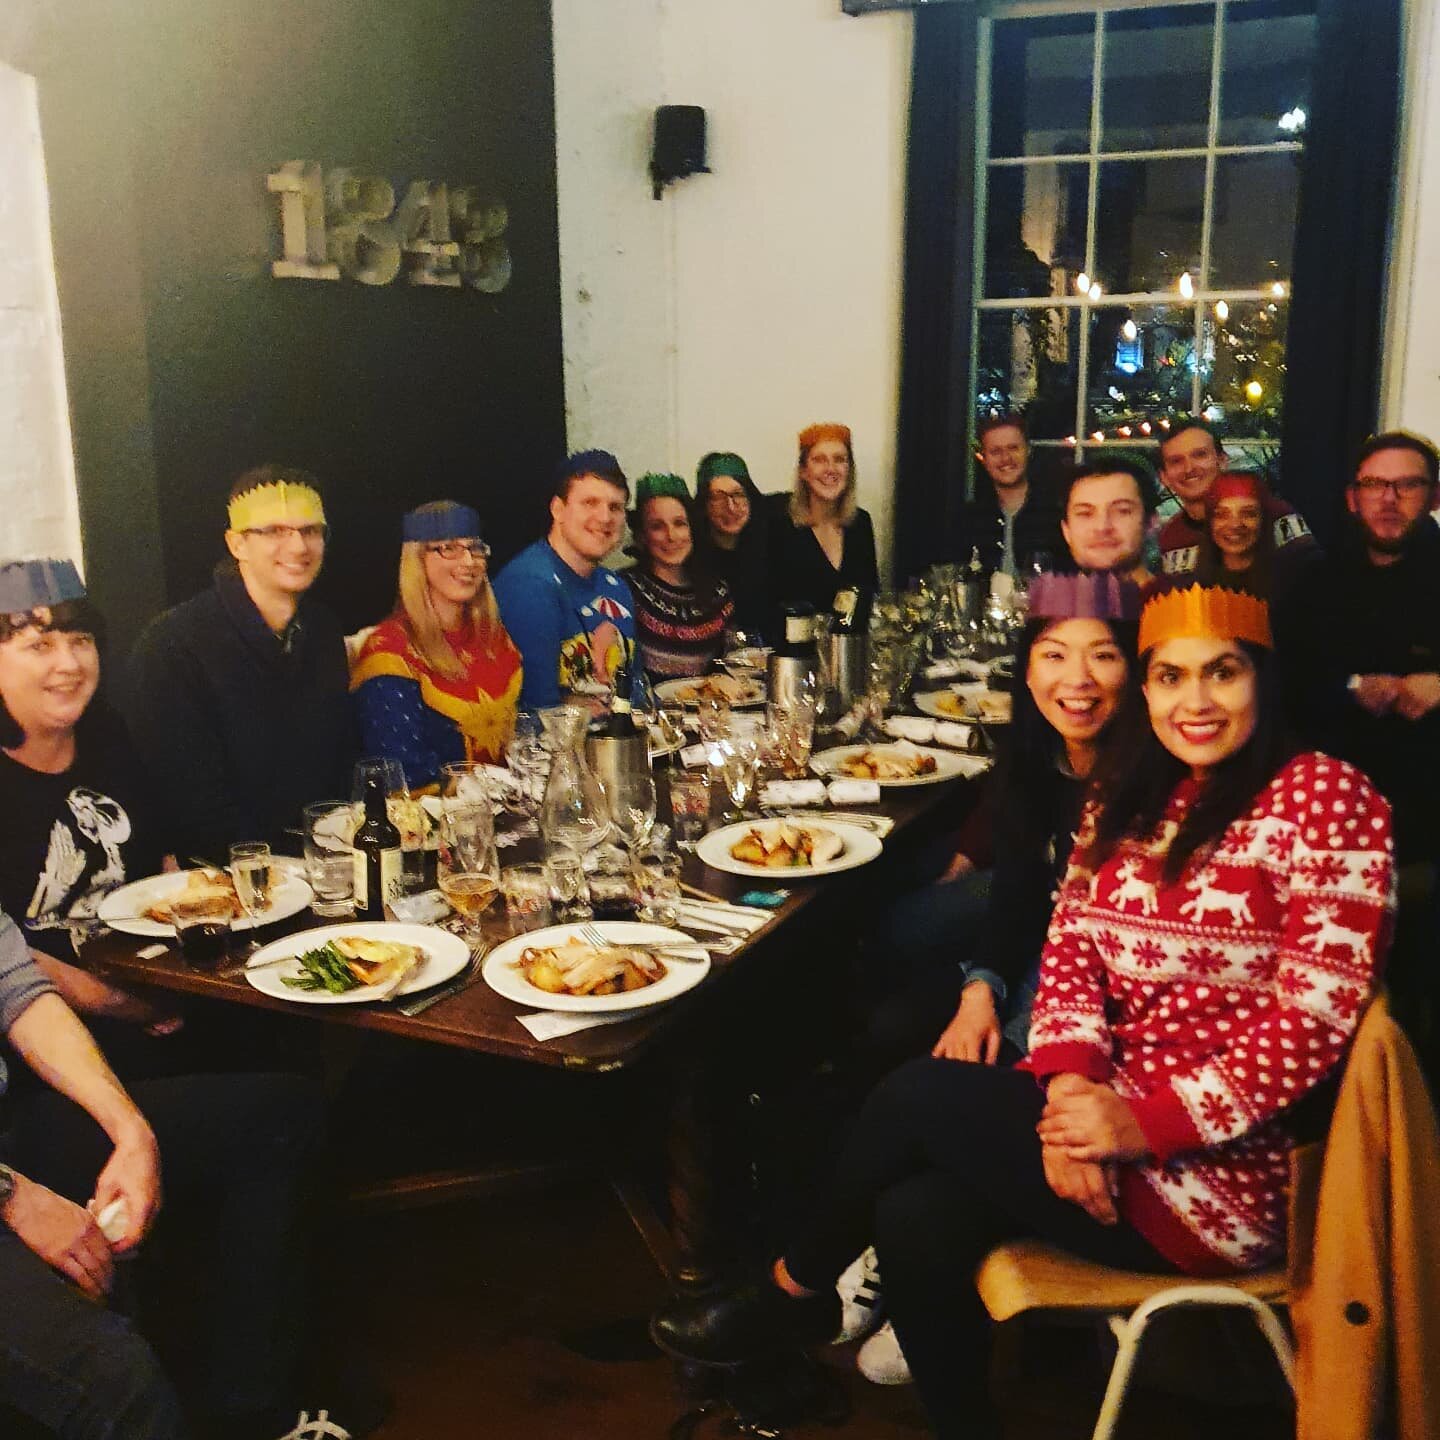 Christmas is well under way here @theprincealbert_camden. Why  not book your Christmas party with us and enjoy the festivities in our beautiful pub.
For bookings contact manager@princealbert.pub

#christmas #camdentown #nw1